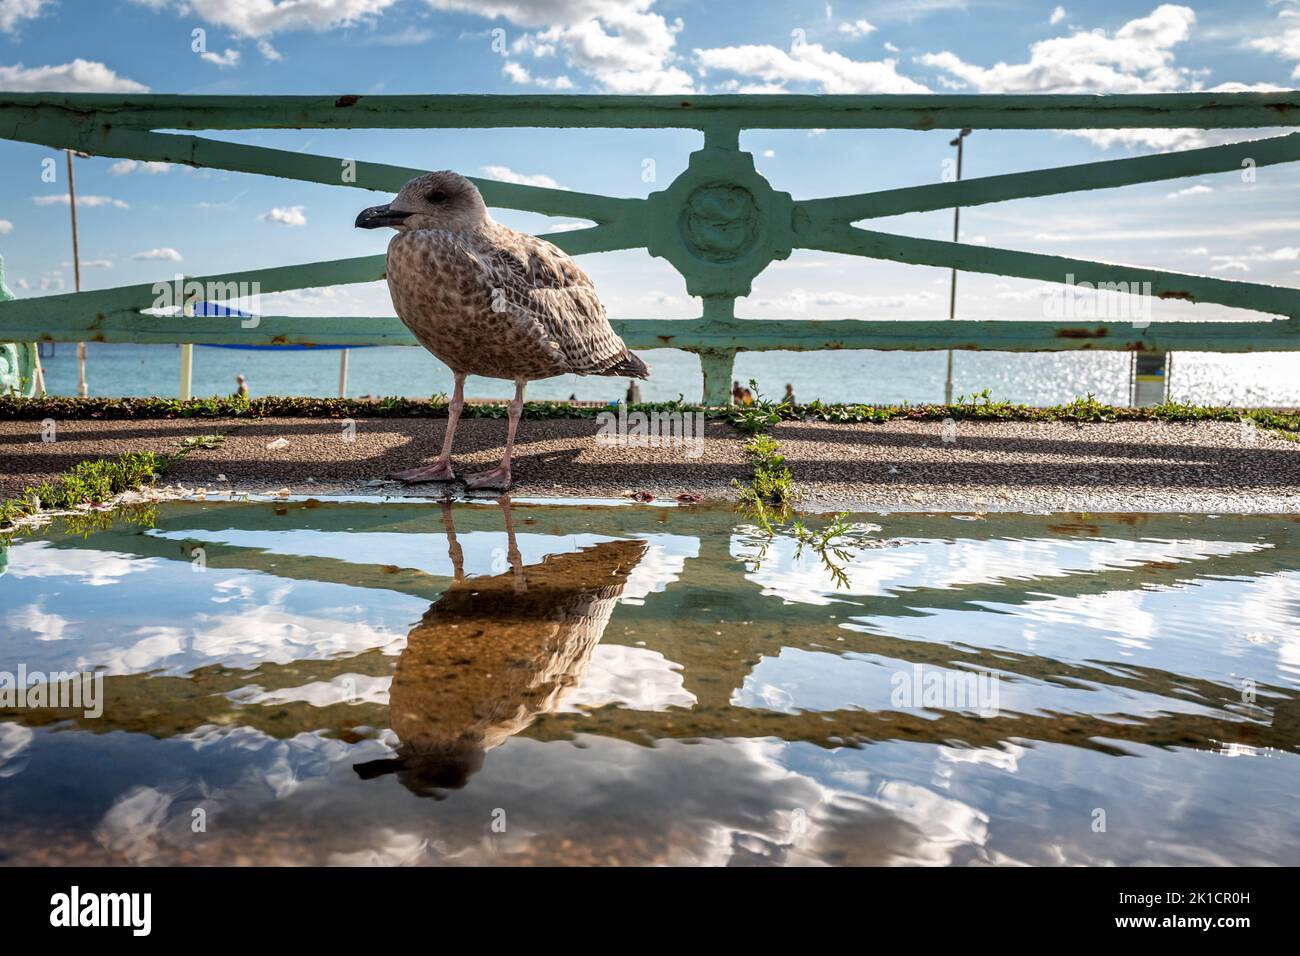 Brighton, September 17th 2022: A fledgling seagull taking a paddle on Brighton seafront this afternoon Credit: Andrew Hasson/Alamy Live News Stock Photo